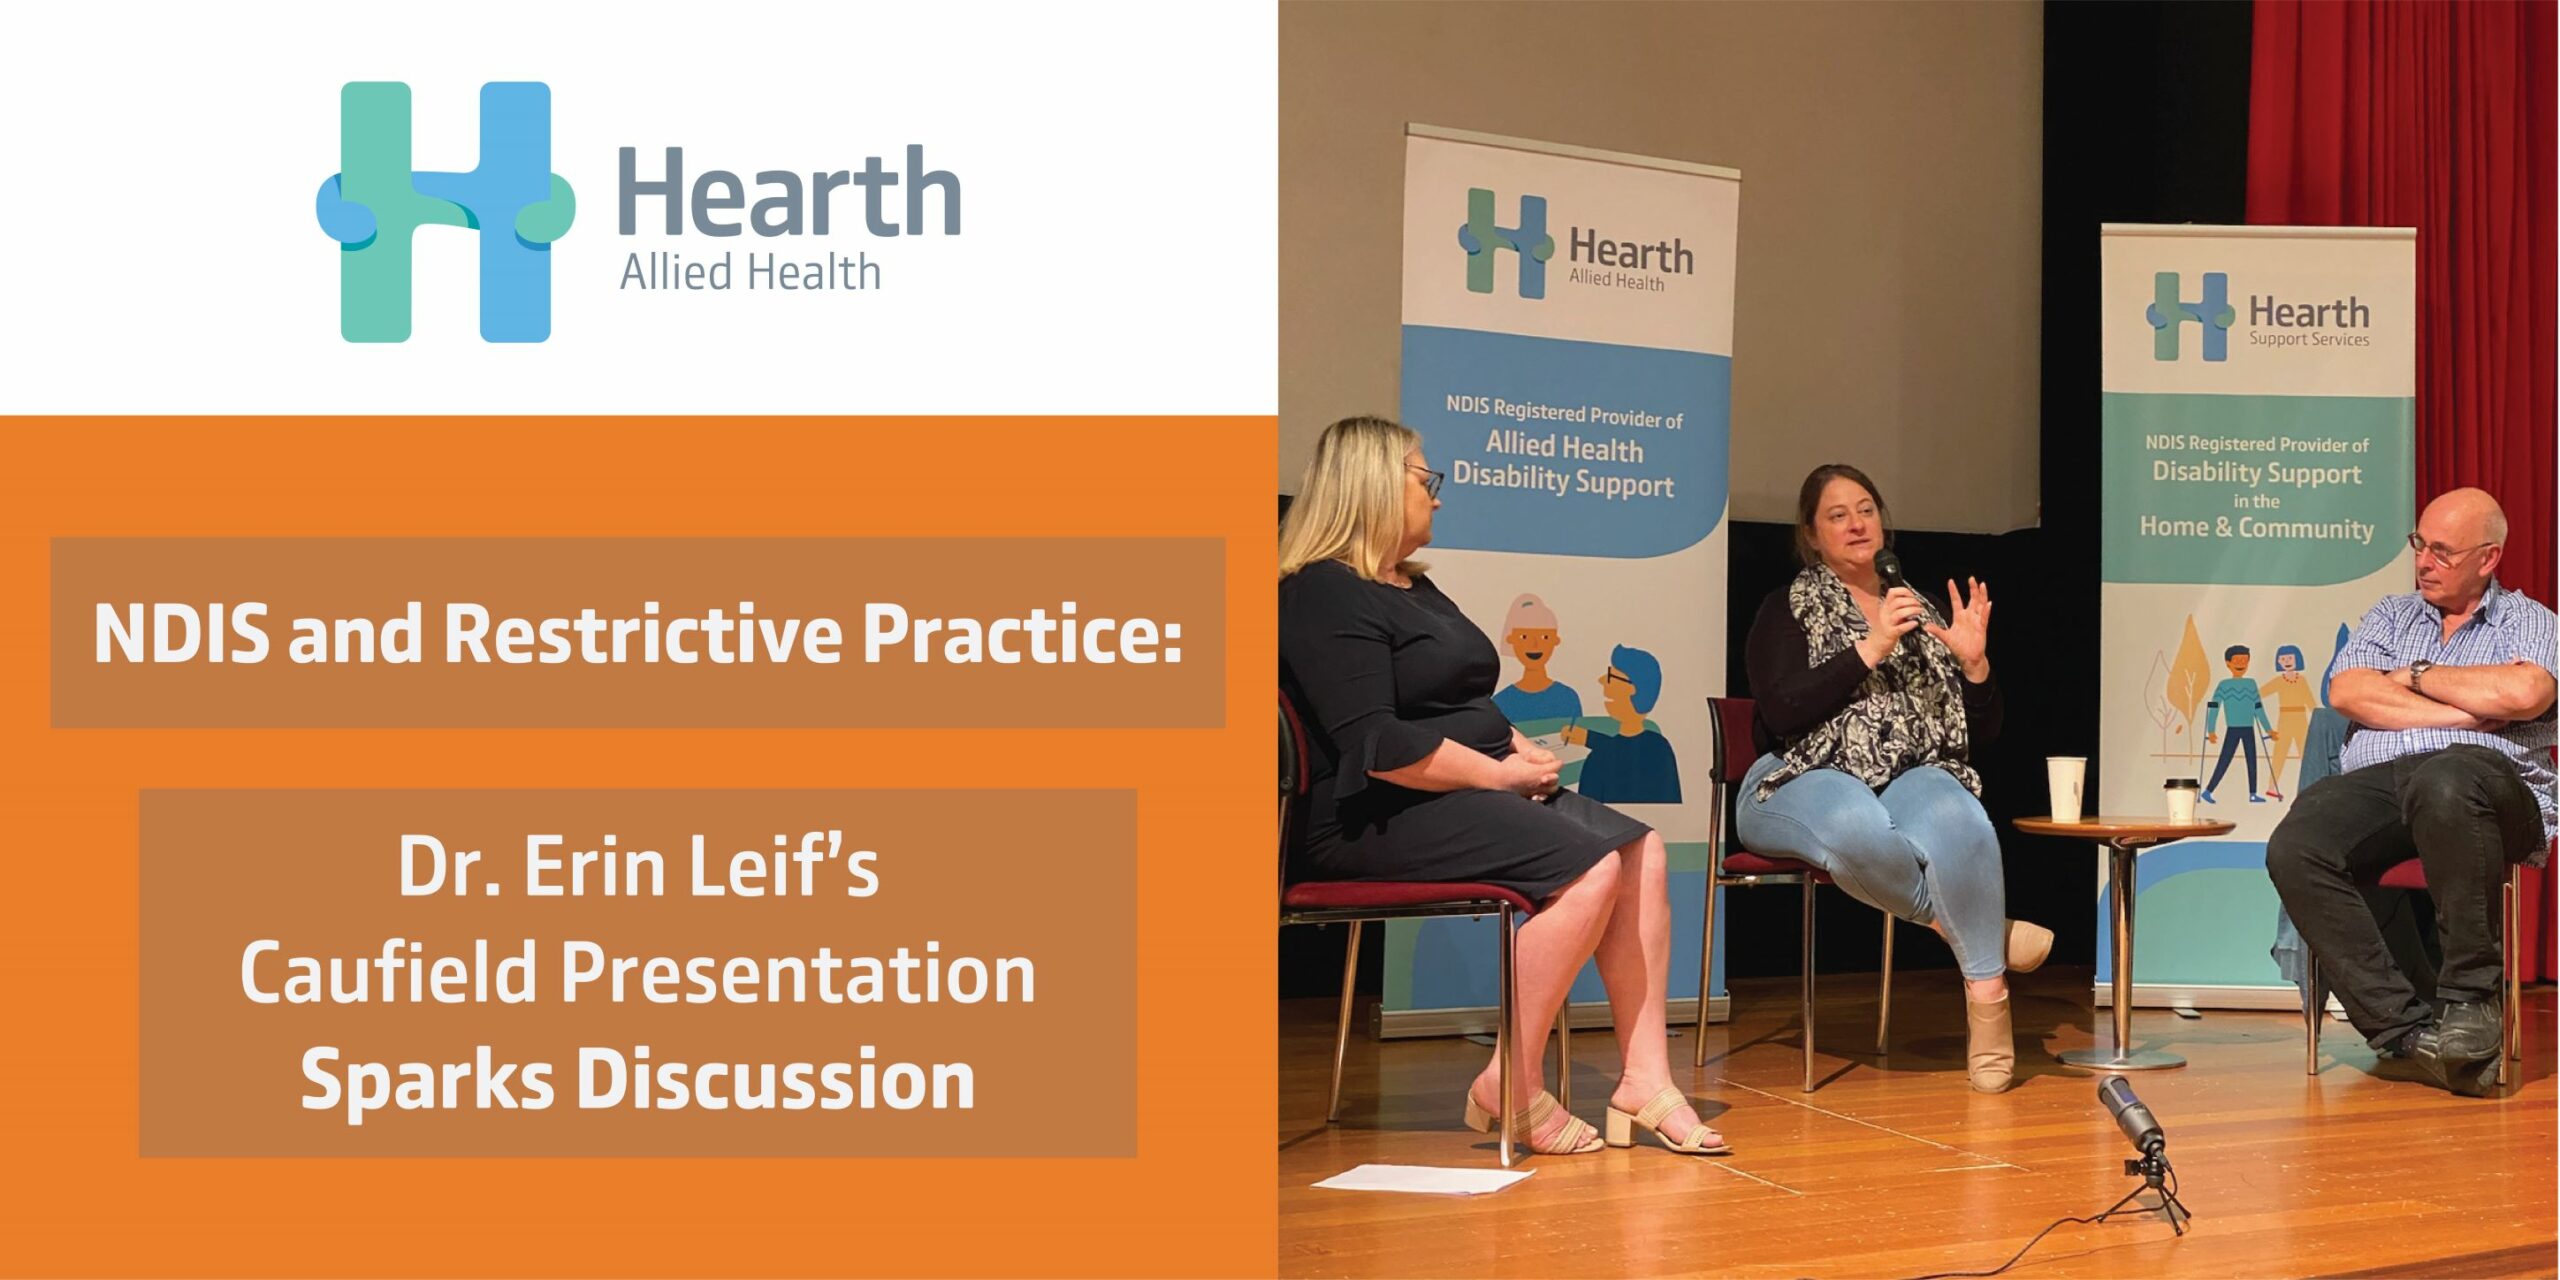 NDIS and Reducing Restrictive Practice: Dr. Erin Leif's Presentation Sparks Discussion